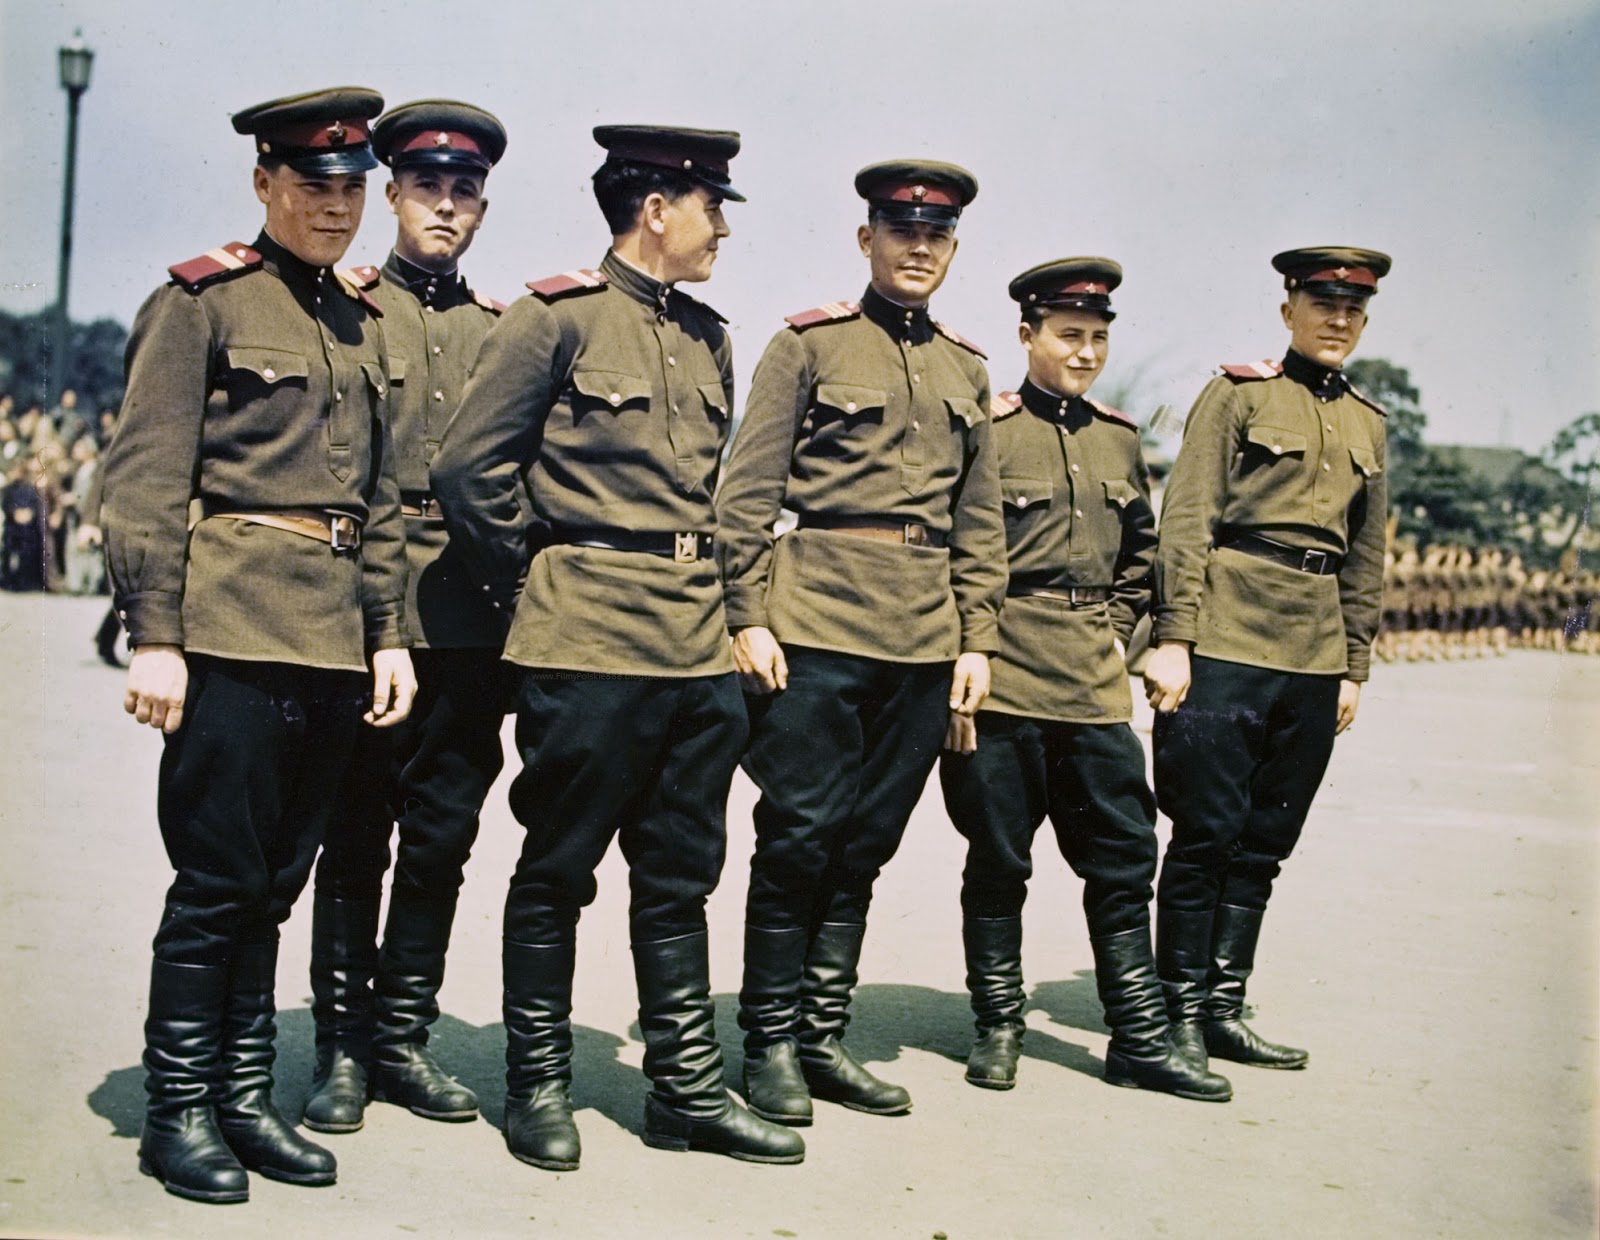 Political officers of the Soviet Red Army ready for the joint Soviet-German parade in occupied Polish city of Brest, Sept. 23, 1939